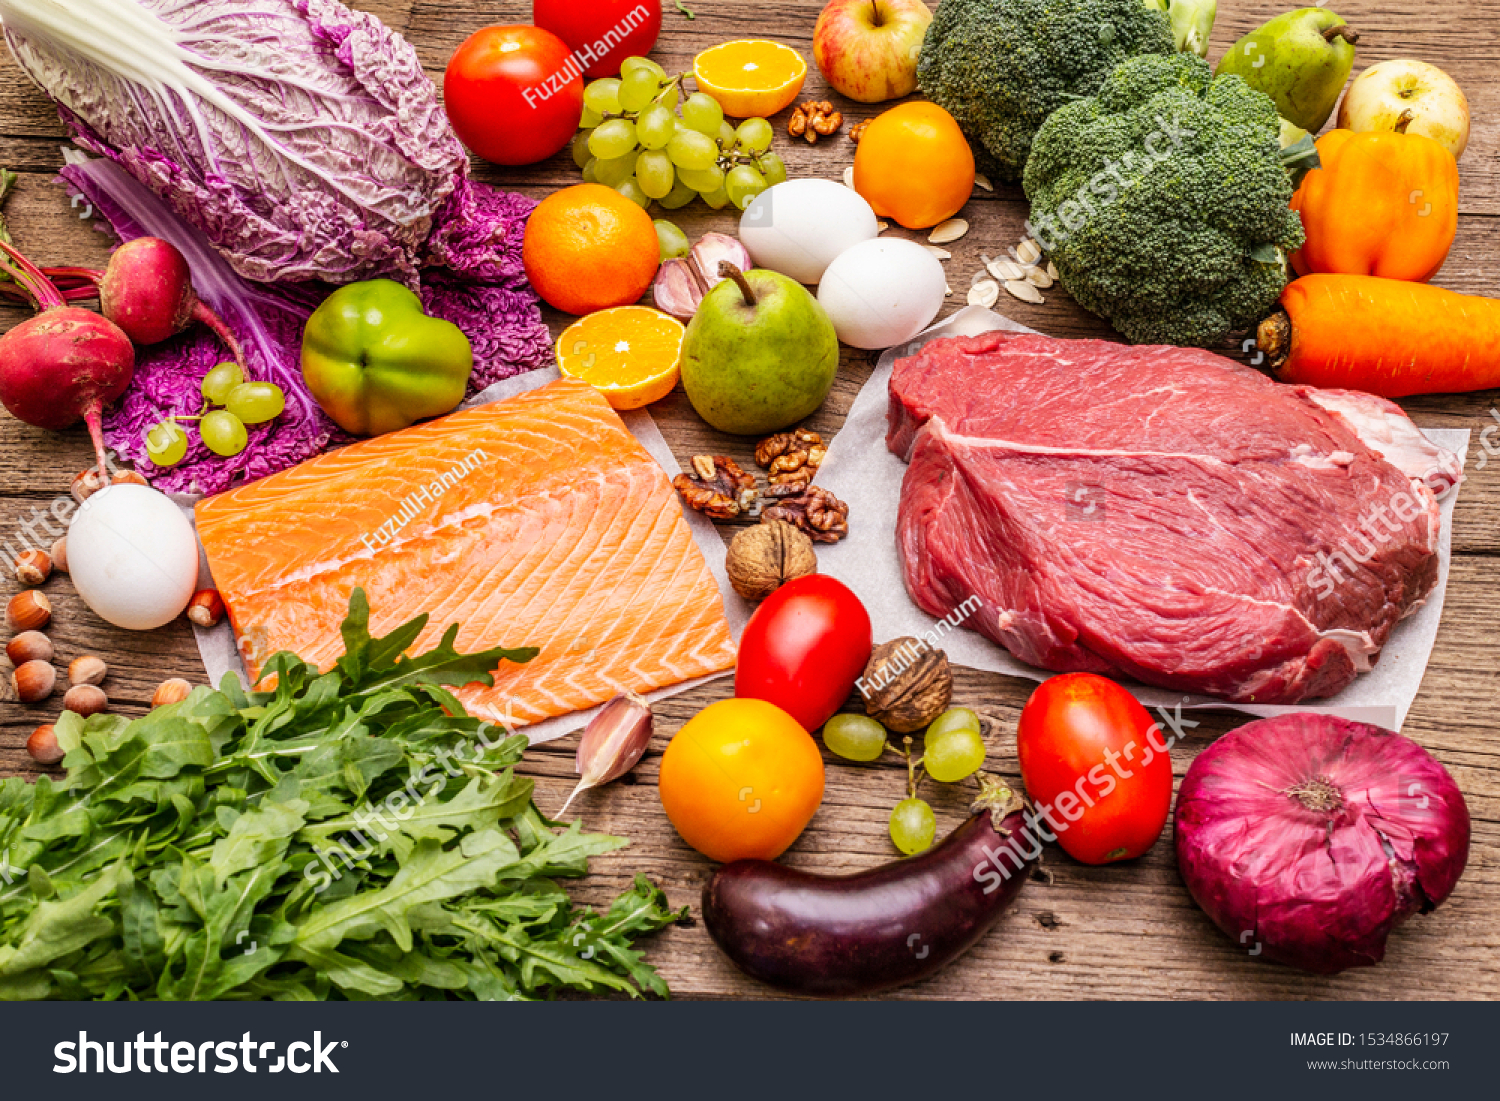 Trending paleo/pegan diet. Healthy balanced food concept. Set of fresh products, raw meat, salmon, vegetables and fruits. Old wooden boards background #1534866197